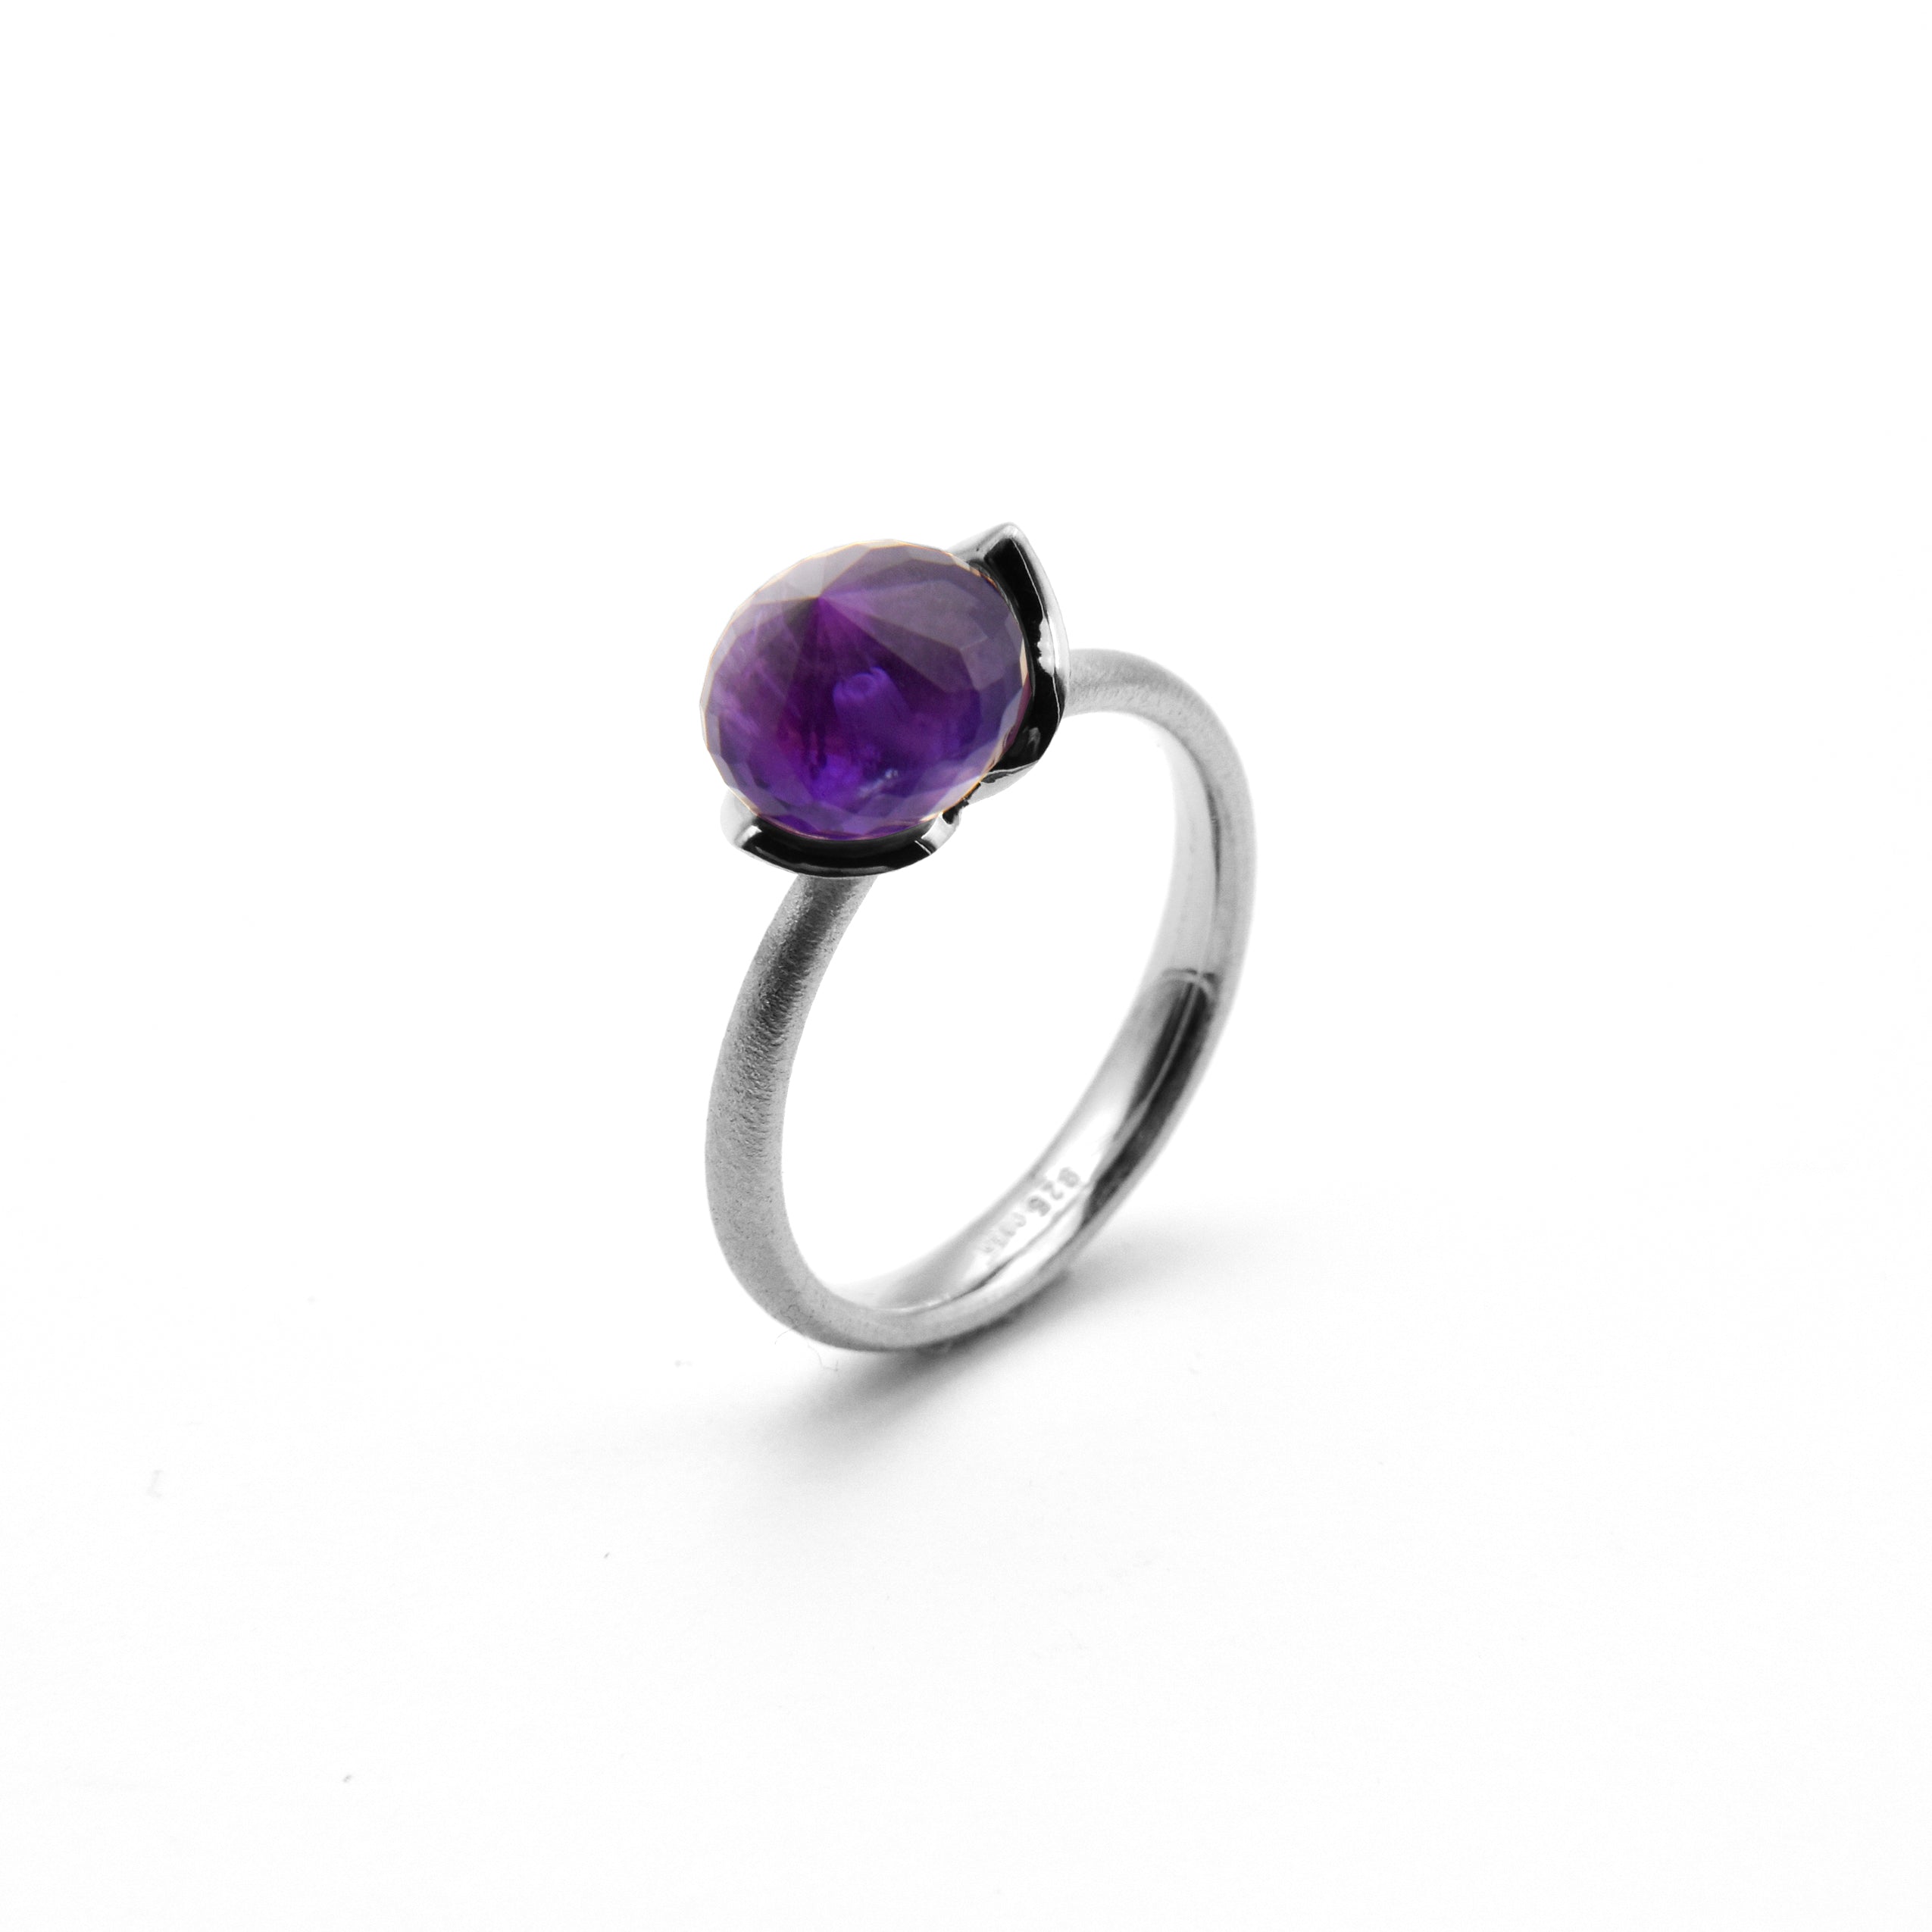 Dolce ring "smal" med ametyst 925/-.